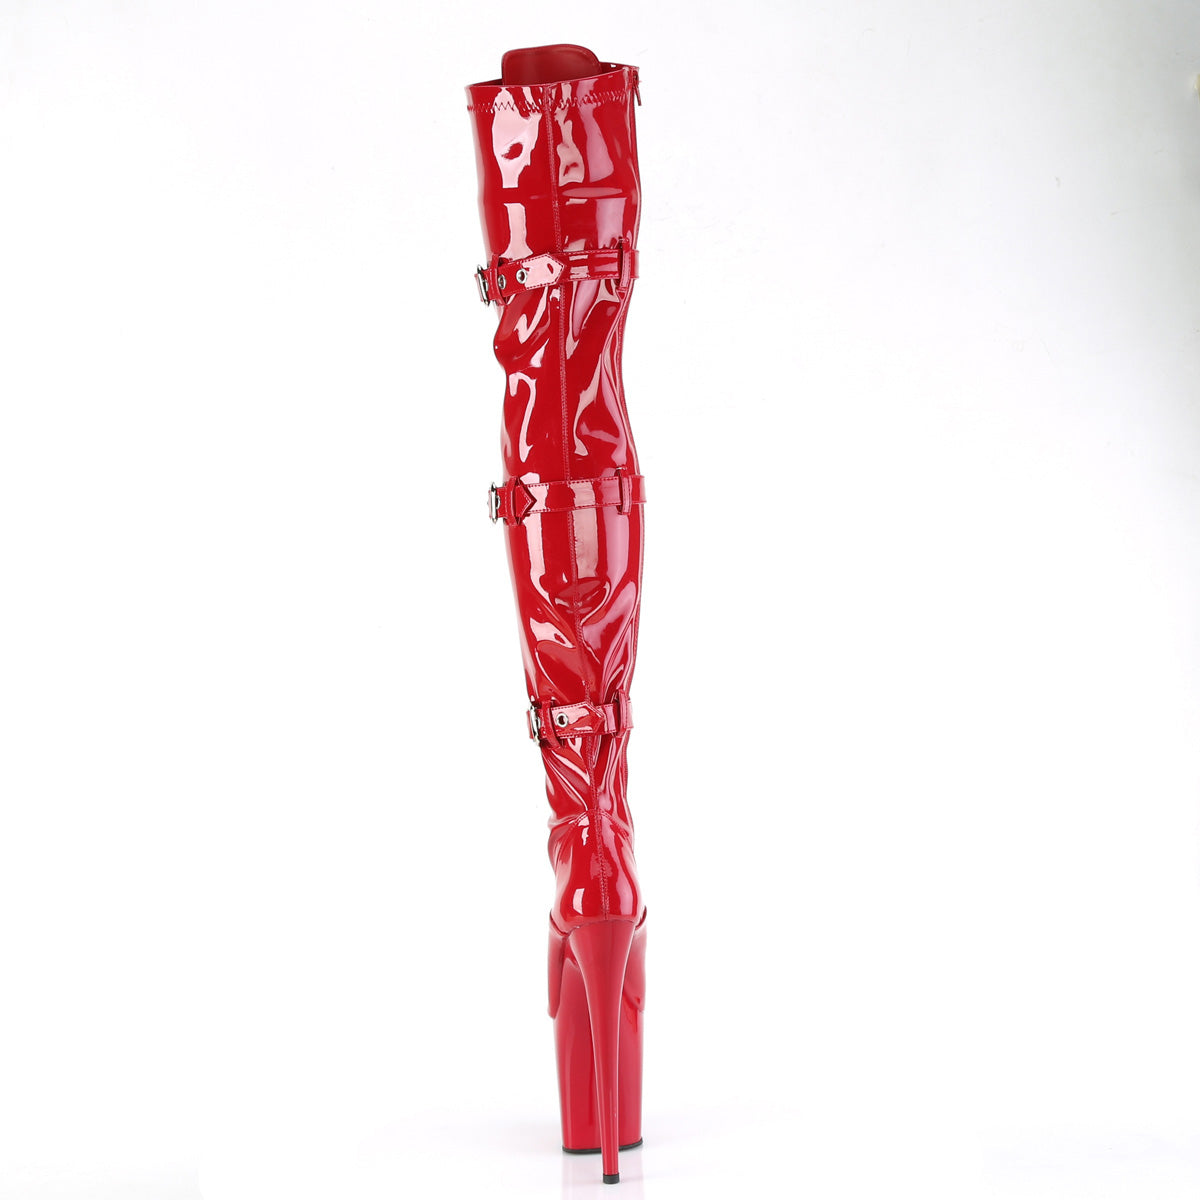 FLAMINGO 3028 RED PATENT THIGH HIGH 8" POLE DANCE BOOTS